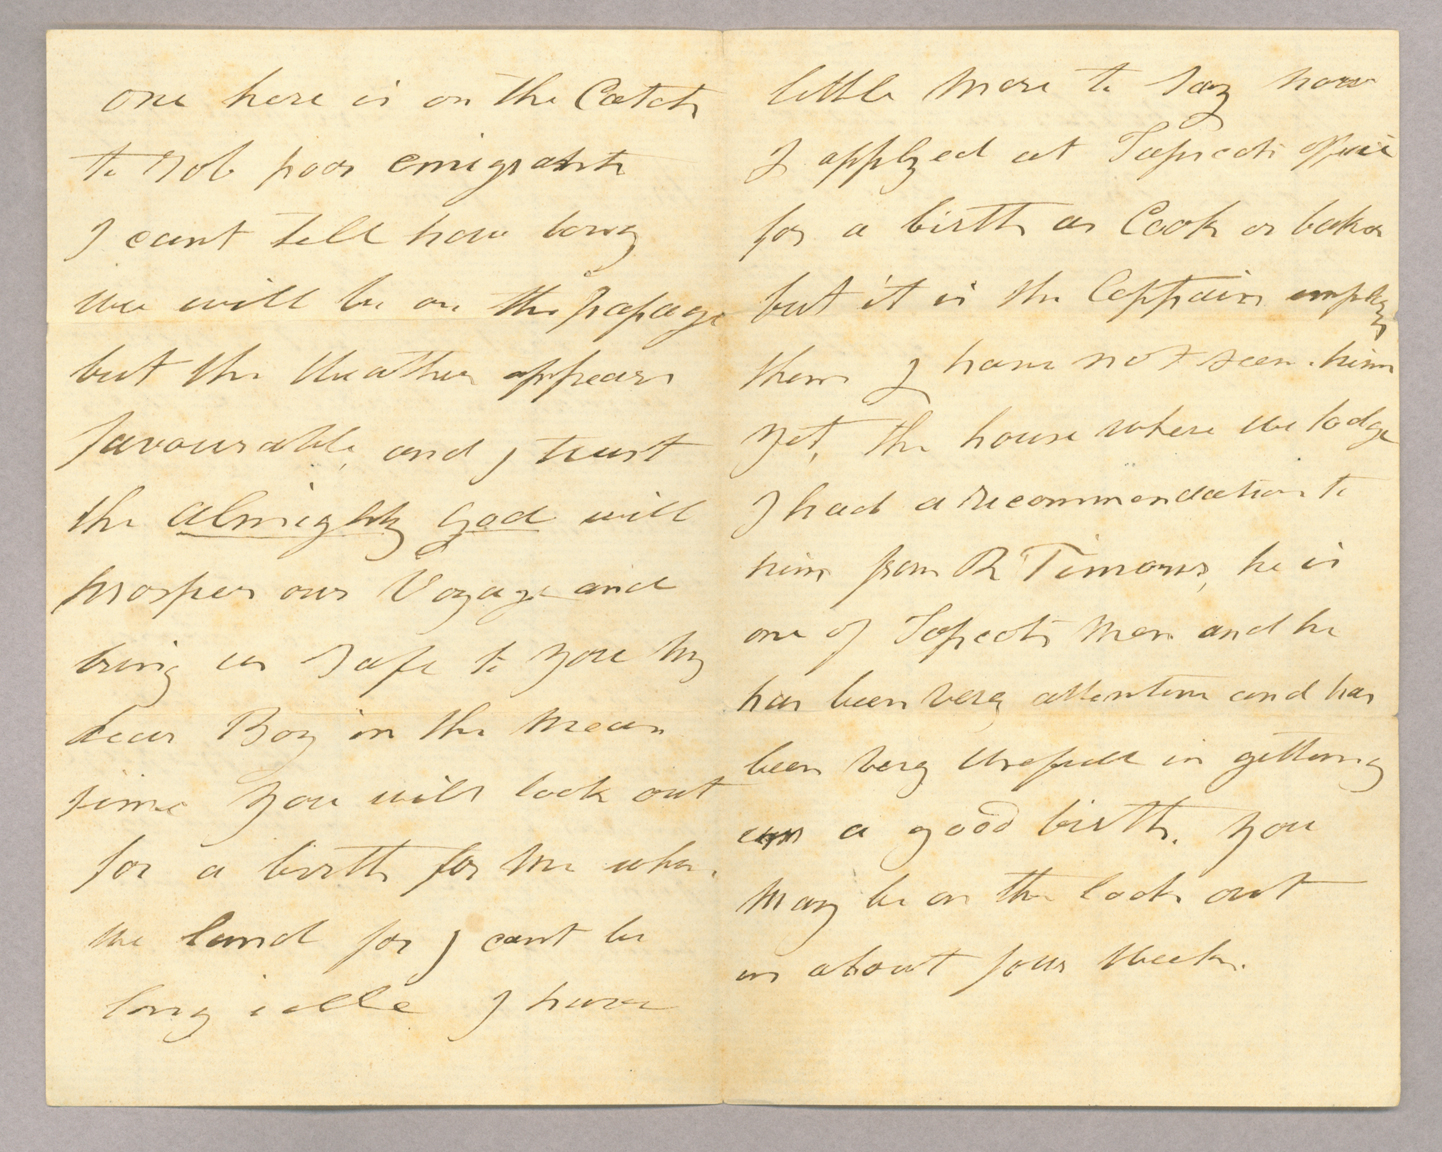 Letter. R[obert] Brownlee, Liverpool, England, to "My Dear John" [John E. Brownlee], n. p., Pages 2-3